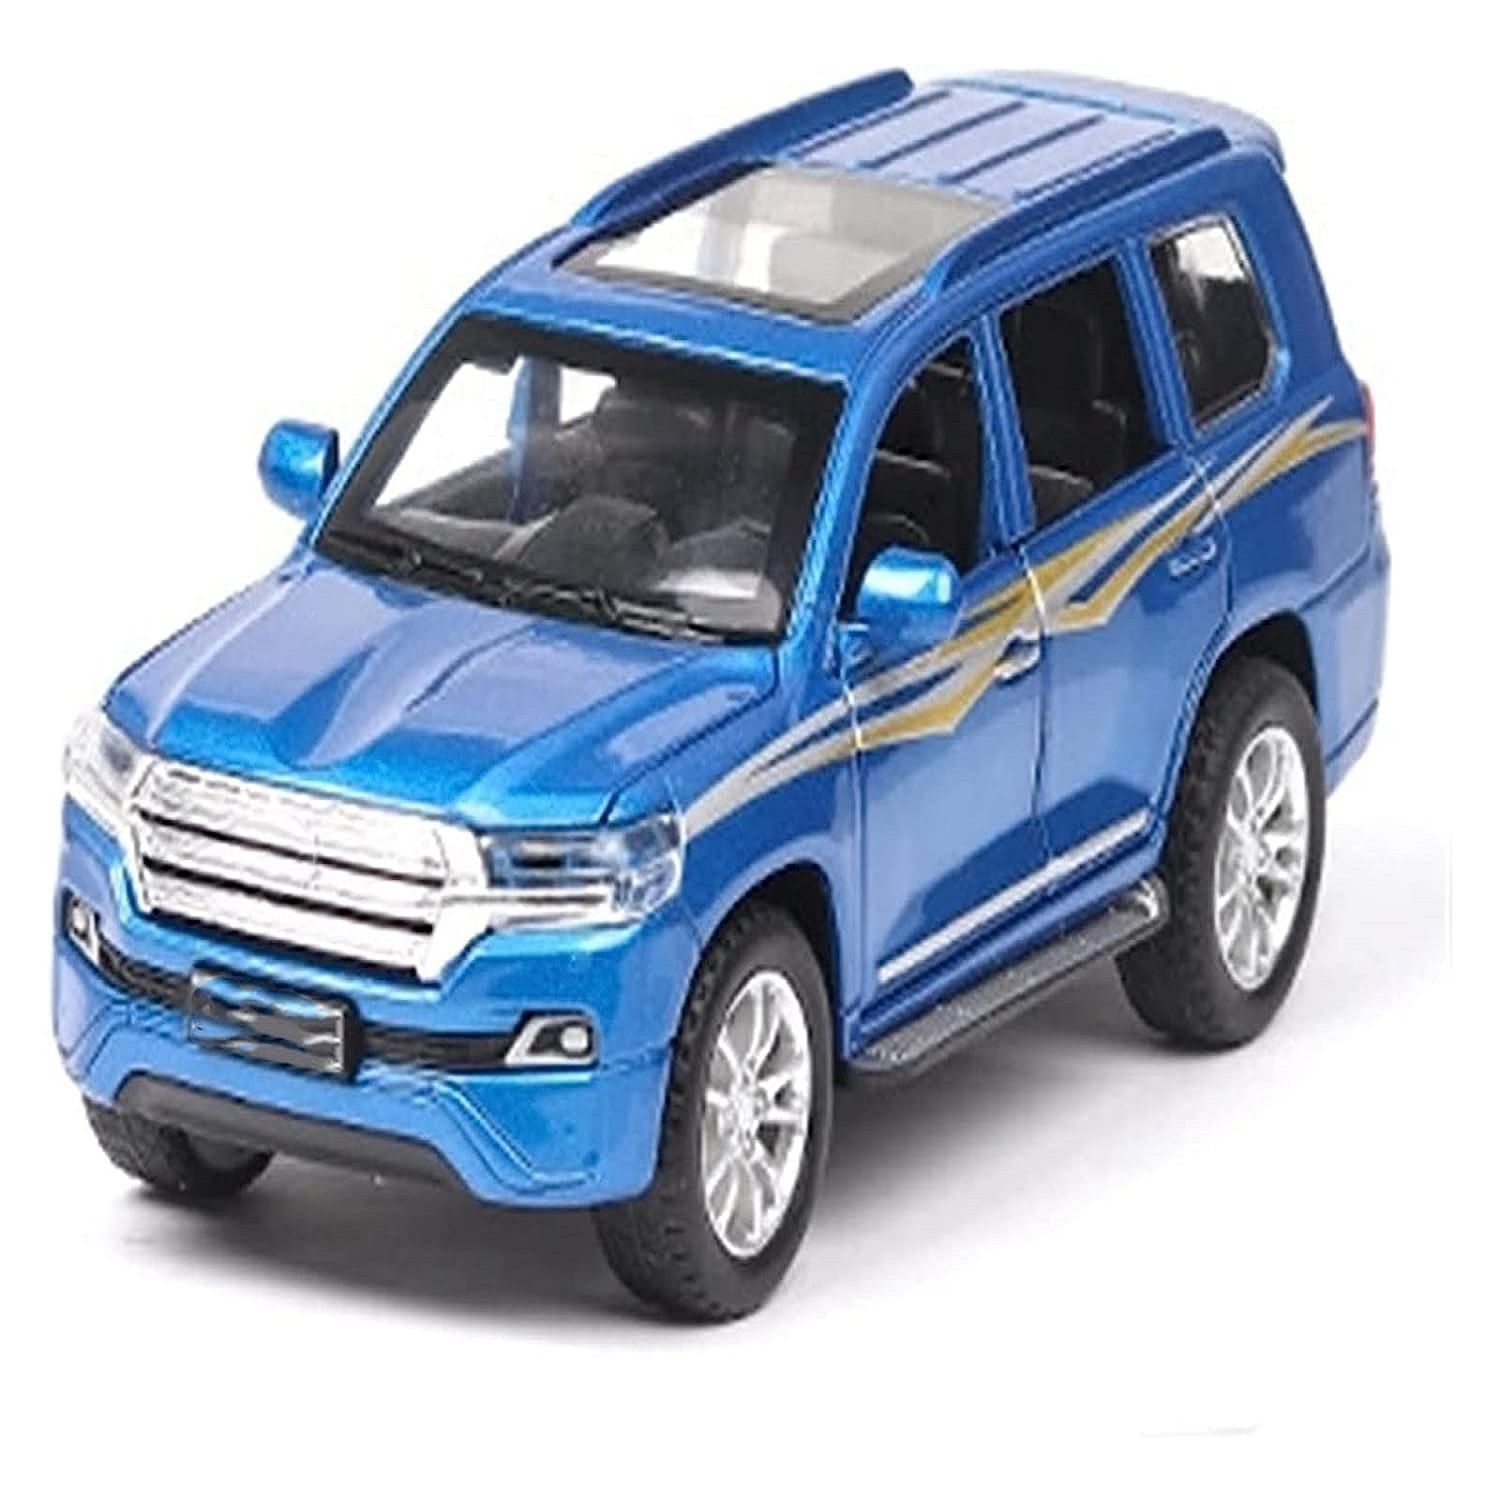 KTRS ENTERPRISE  1:32 Scale Die-Cast Dual-Tone Lland-Cruiiser with 6 Openable Doors,Pull Back Action, Blinking Headlights & Tail Lights